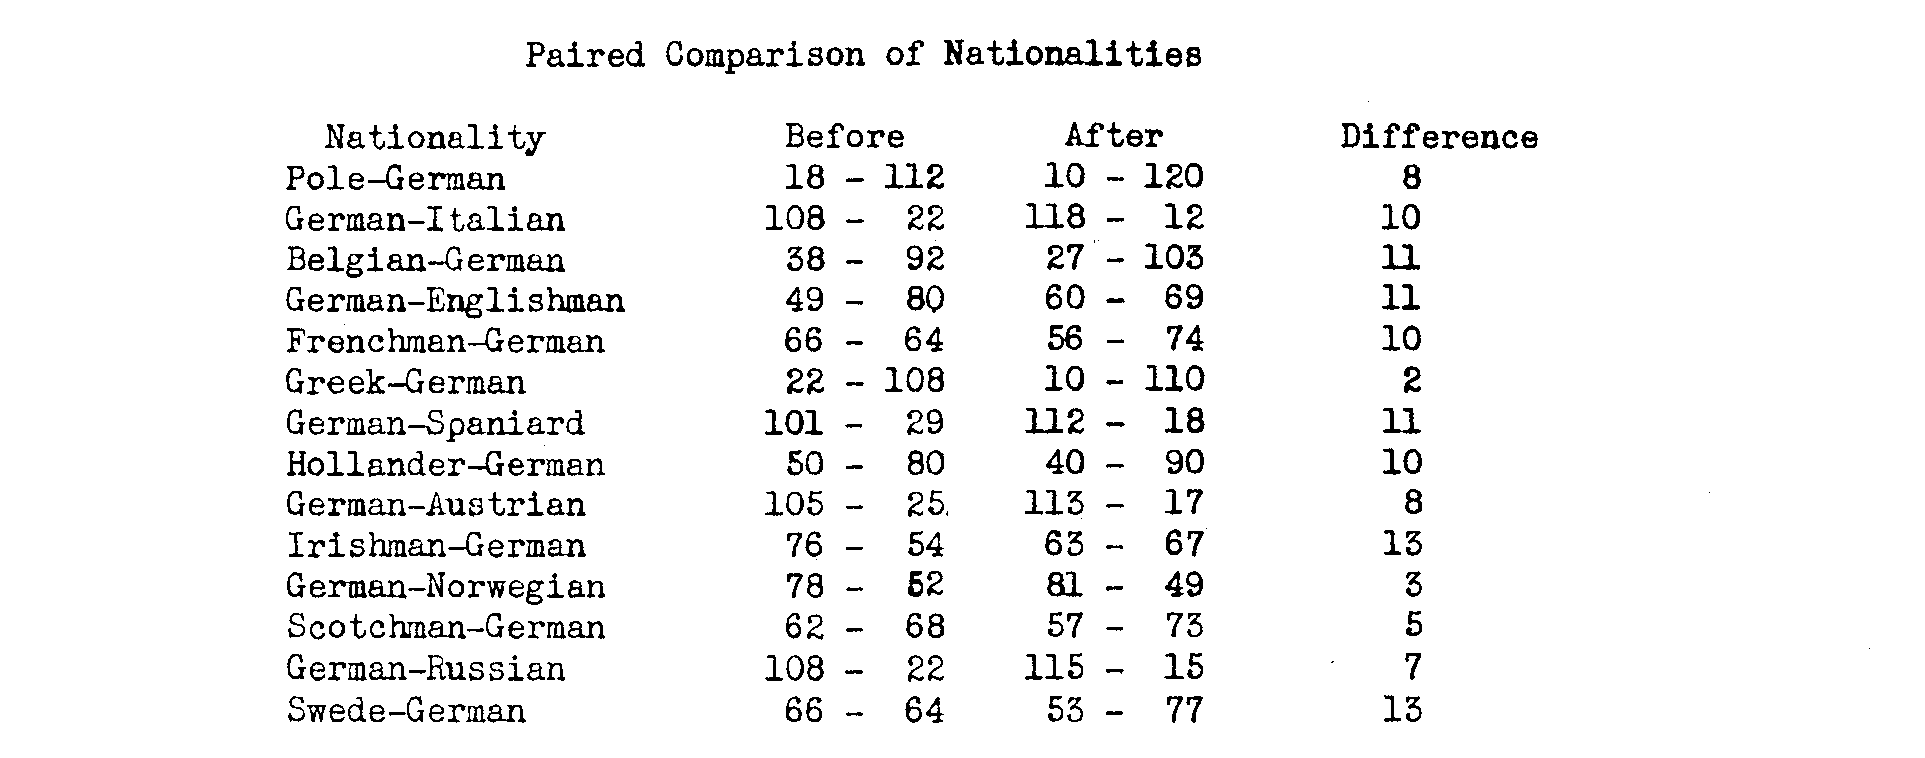  Table contrasting National Prefernces